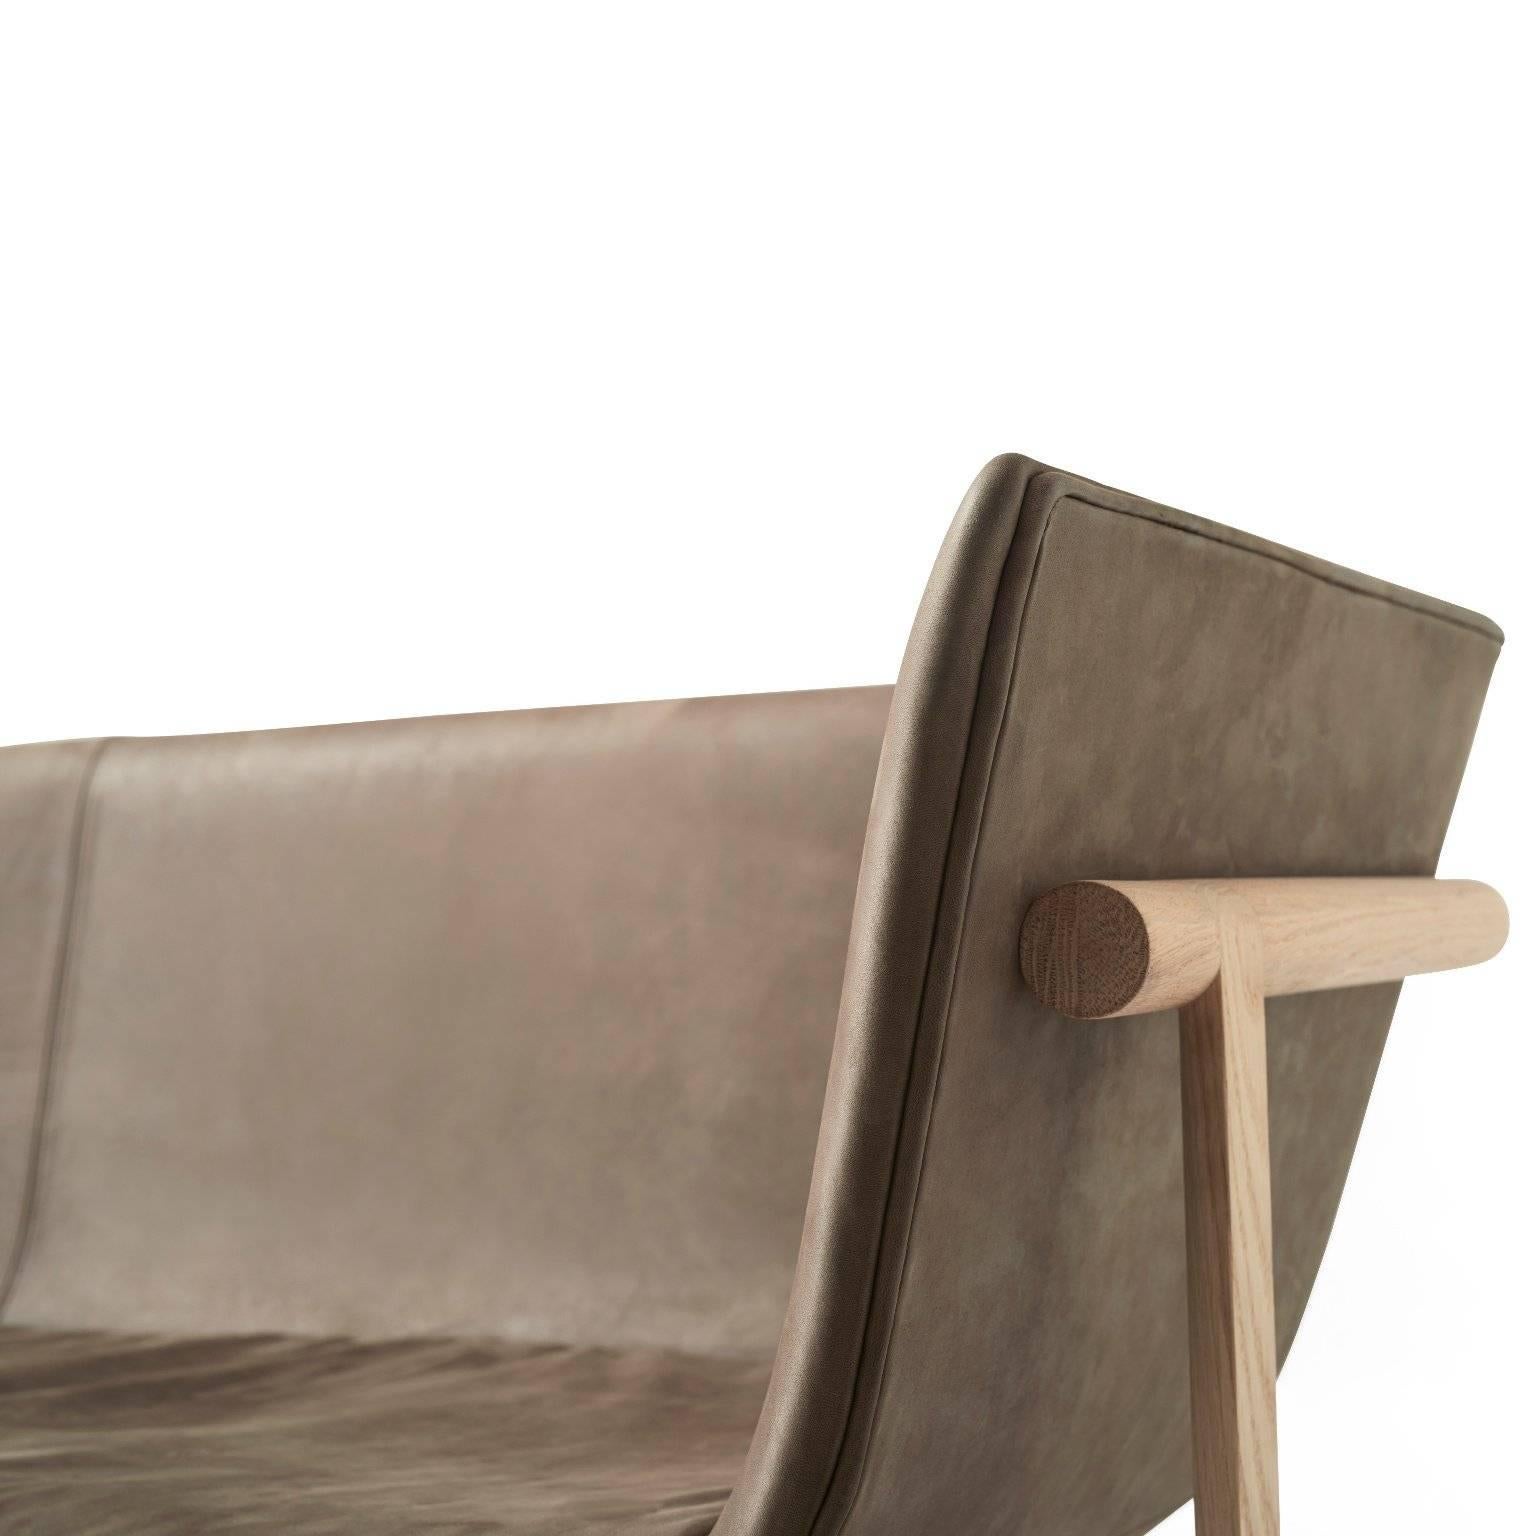 Portuguese designer Rui Alves was inspired to create the Tailor sofa by the memory of his grandfather’s favorite tailor shop. An image of the tailors bent over work tables and of old wooden hangers holding grey suits has stayed with Rui. Like that